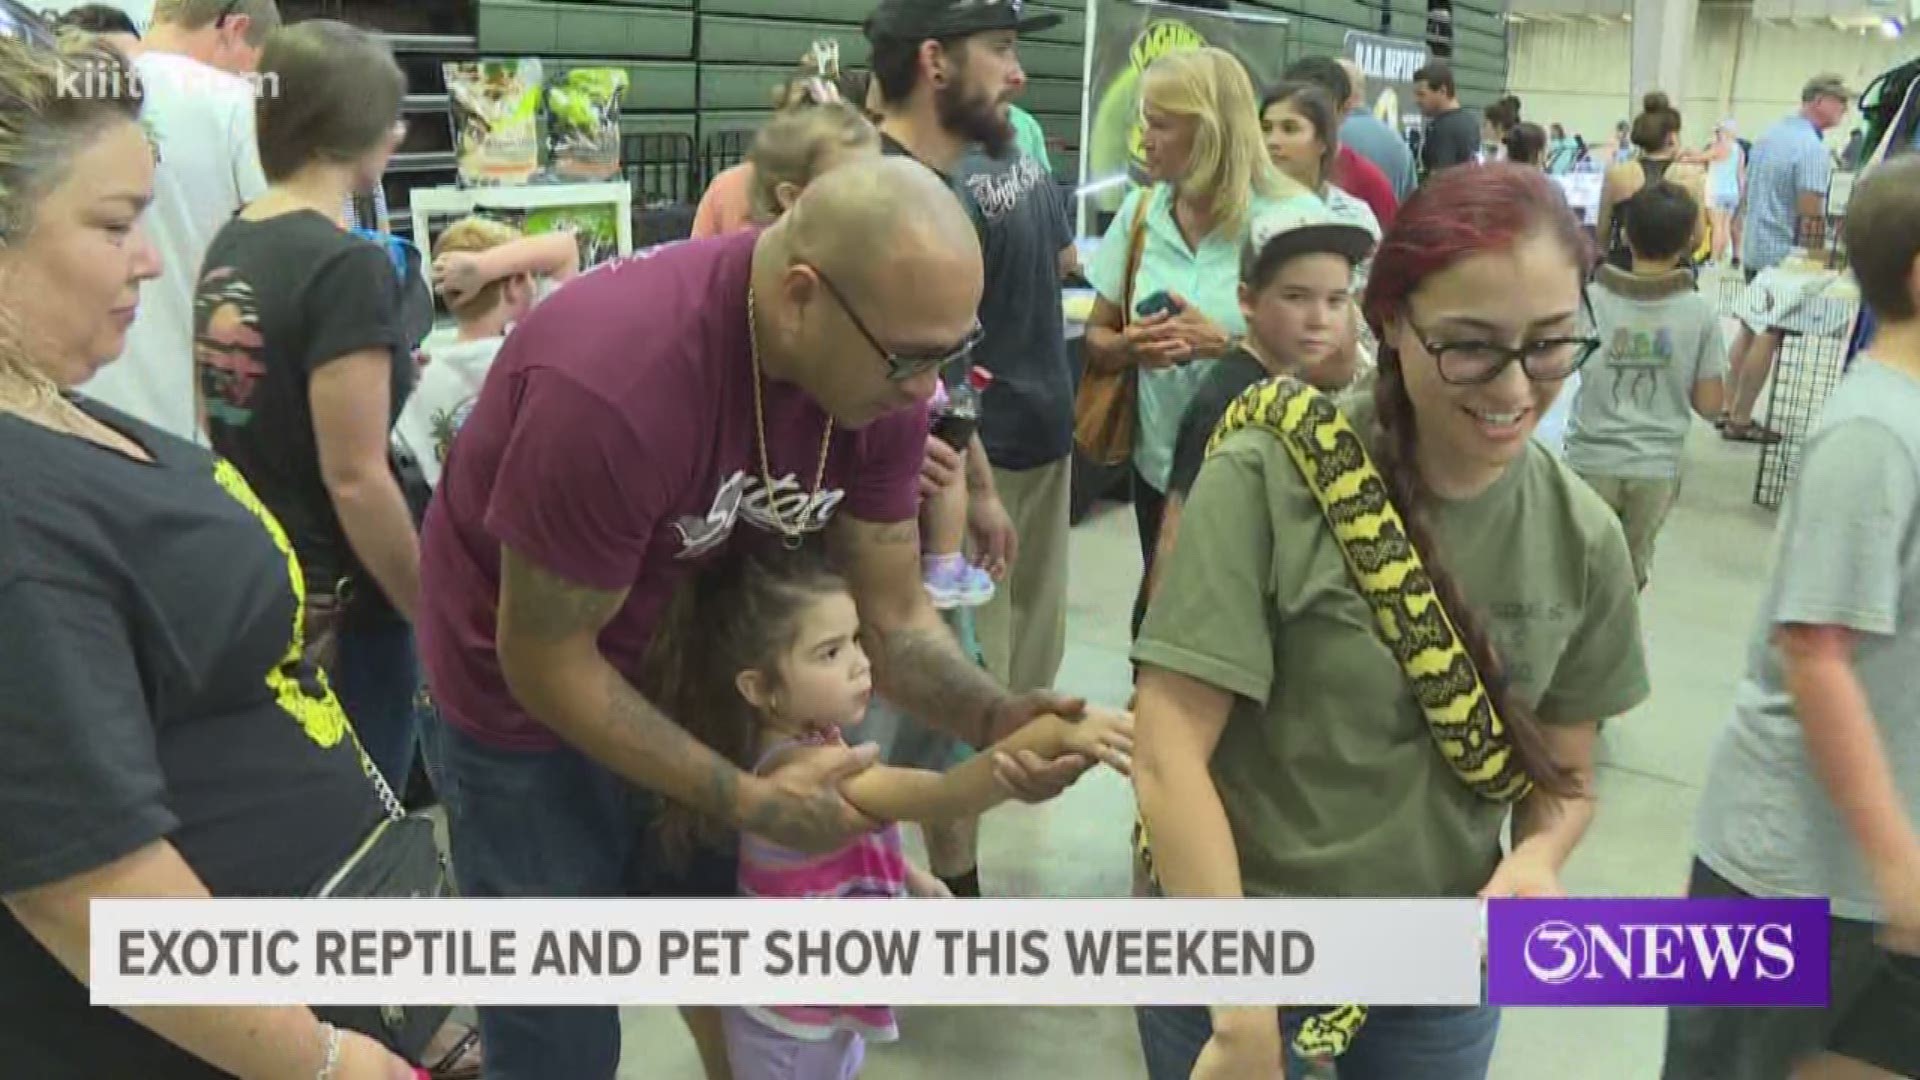 Fans of lizards, frogs, and all kinds of reptiles and amphibians can enjoy the Houston Exotic Reptile and Pet Show.